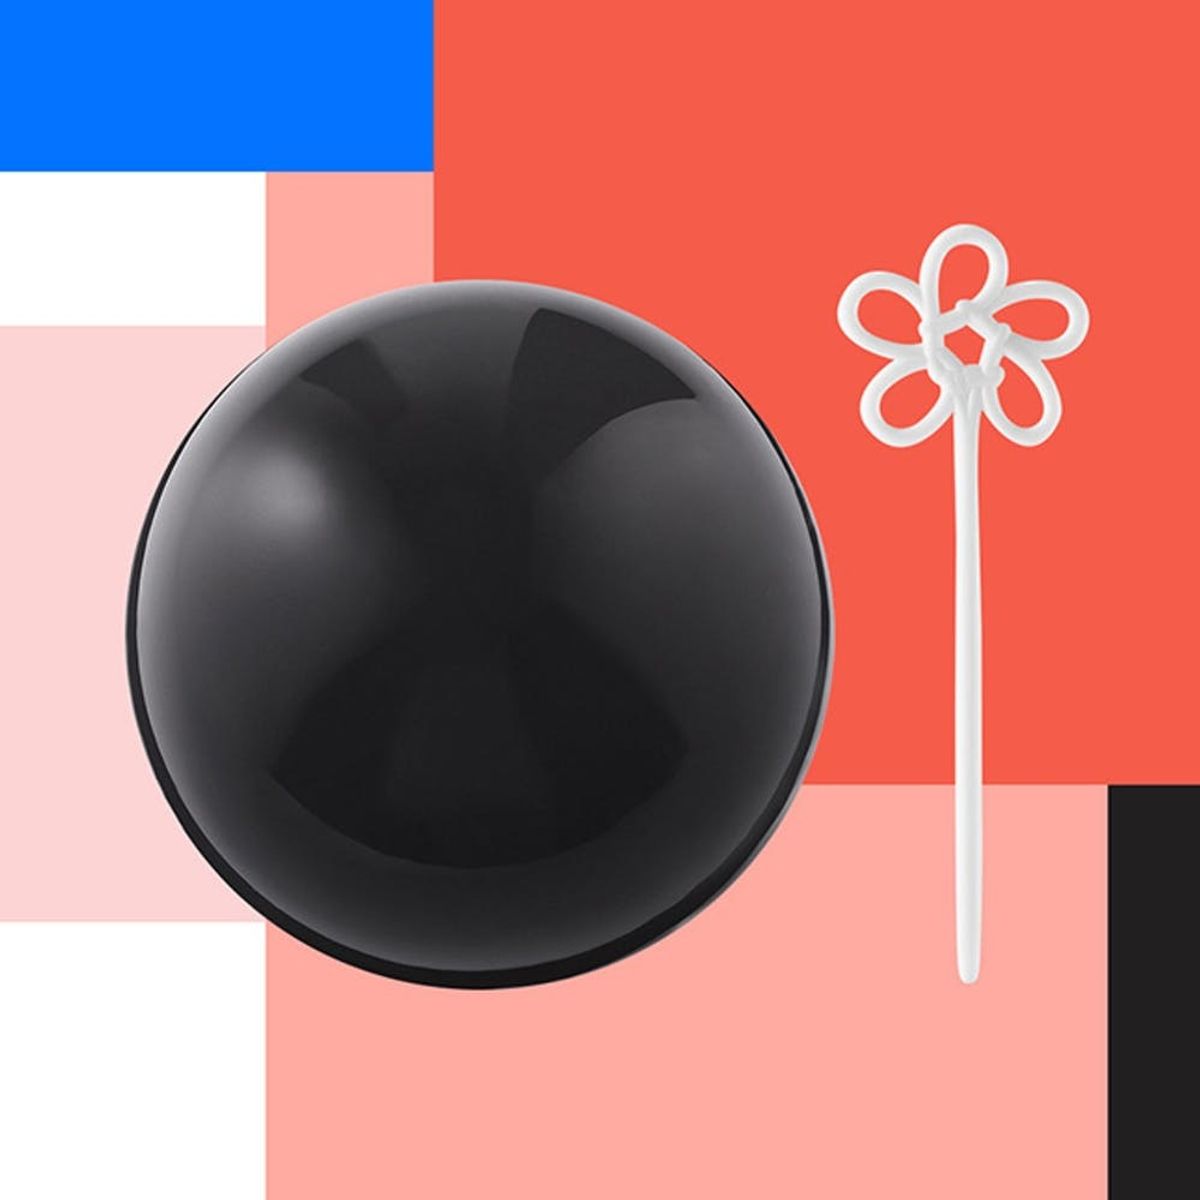 How a Squishy Black Ball Became My Go-To Facial Cleanser